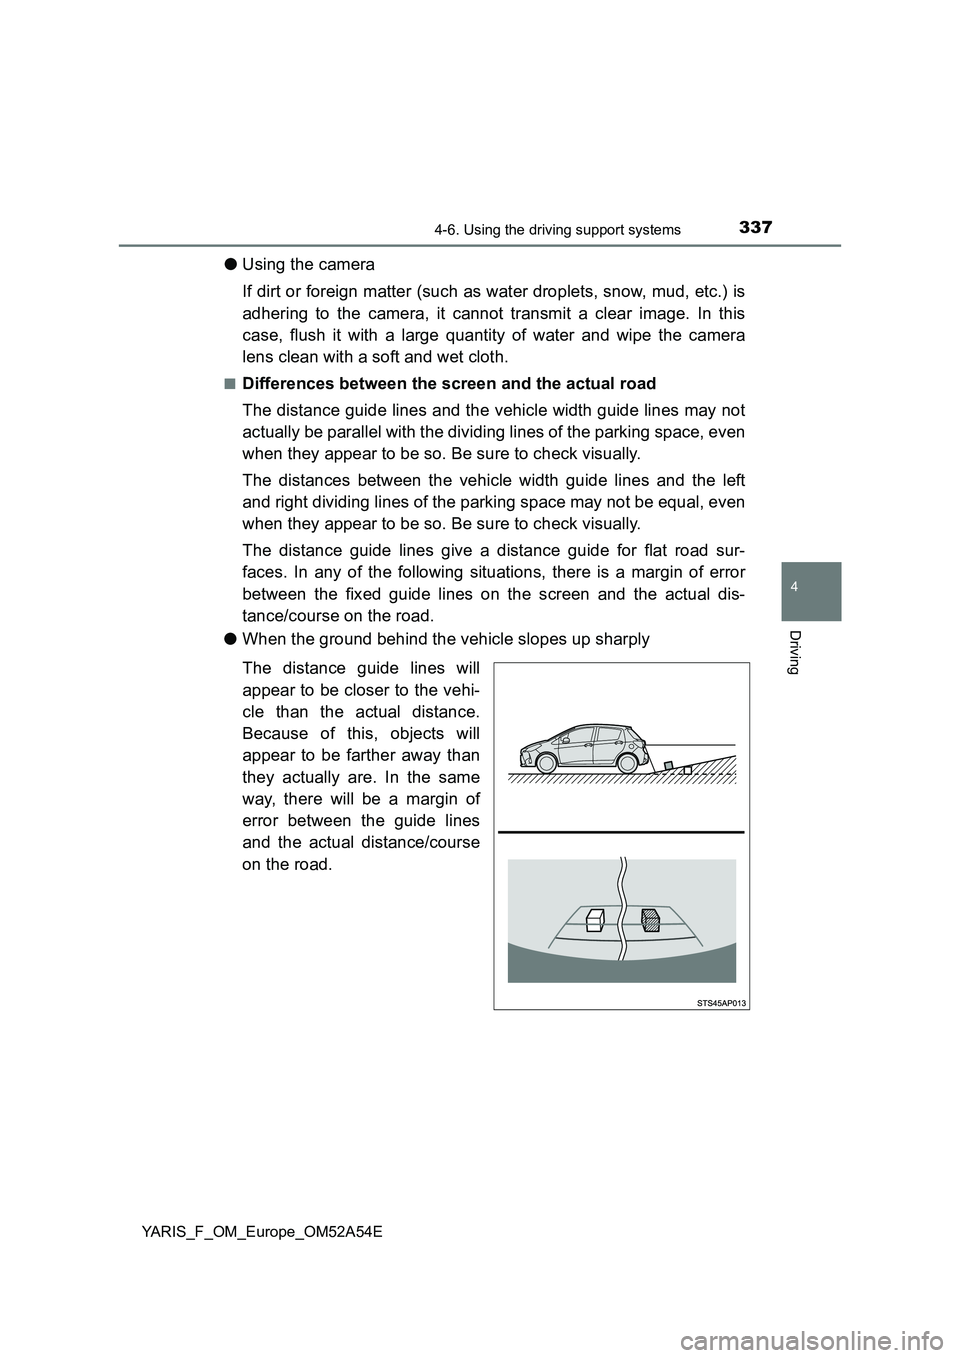 TOYOTA YARIS 2020  Owners Manual 3374-6. Using the driving support systems
4
Driving
YARIS_F_OM_Europe_OM52A54E
●Using the camera 
If dirt or foreign matter (such as water droplets, snow, mud, etc.) is 
adhering to the camera, it c